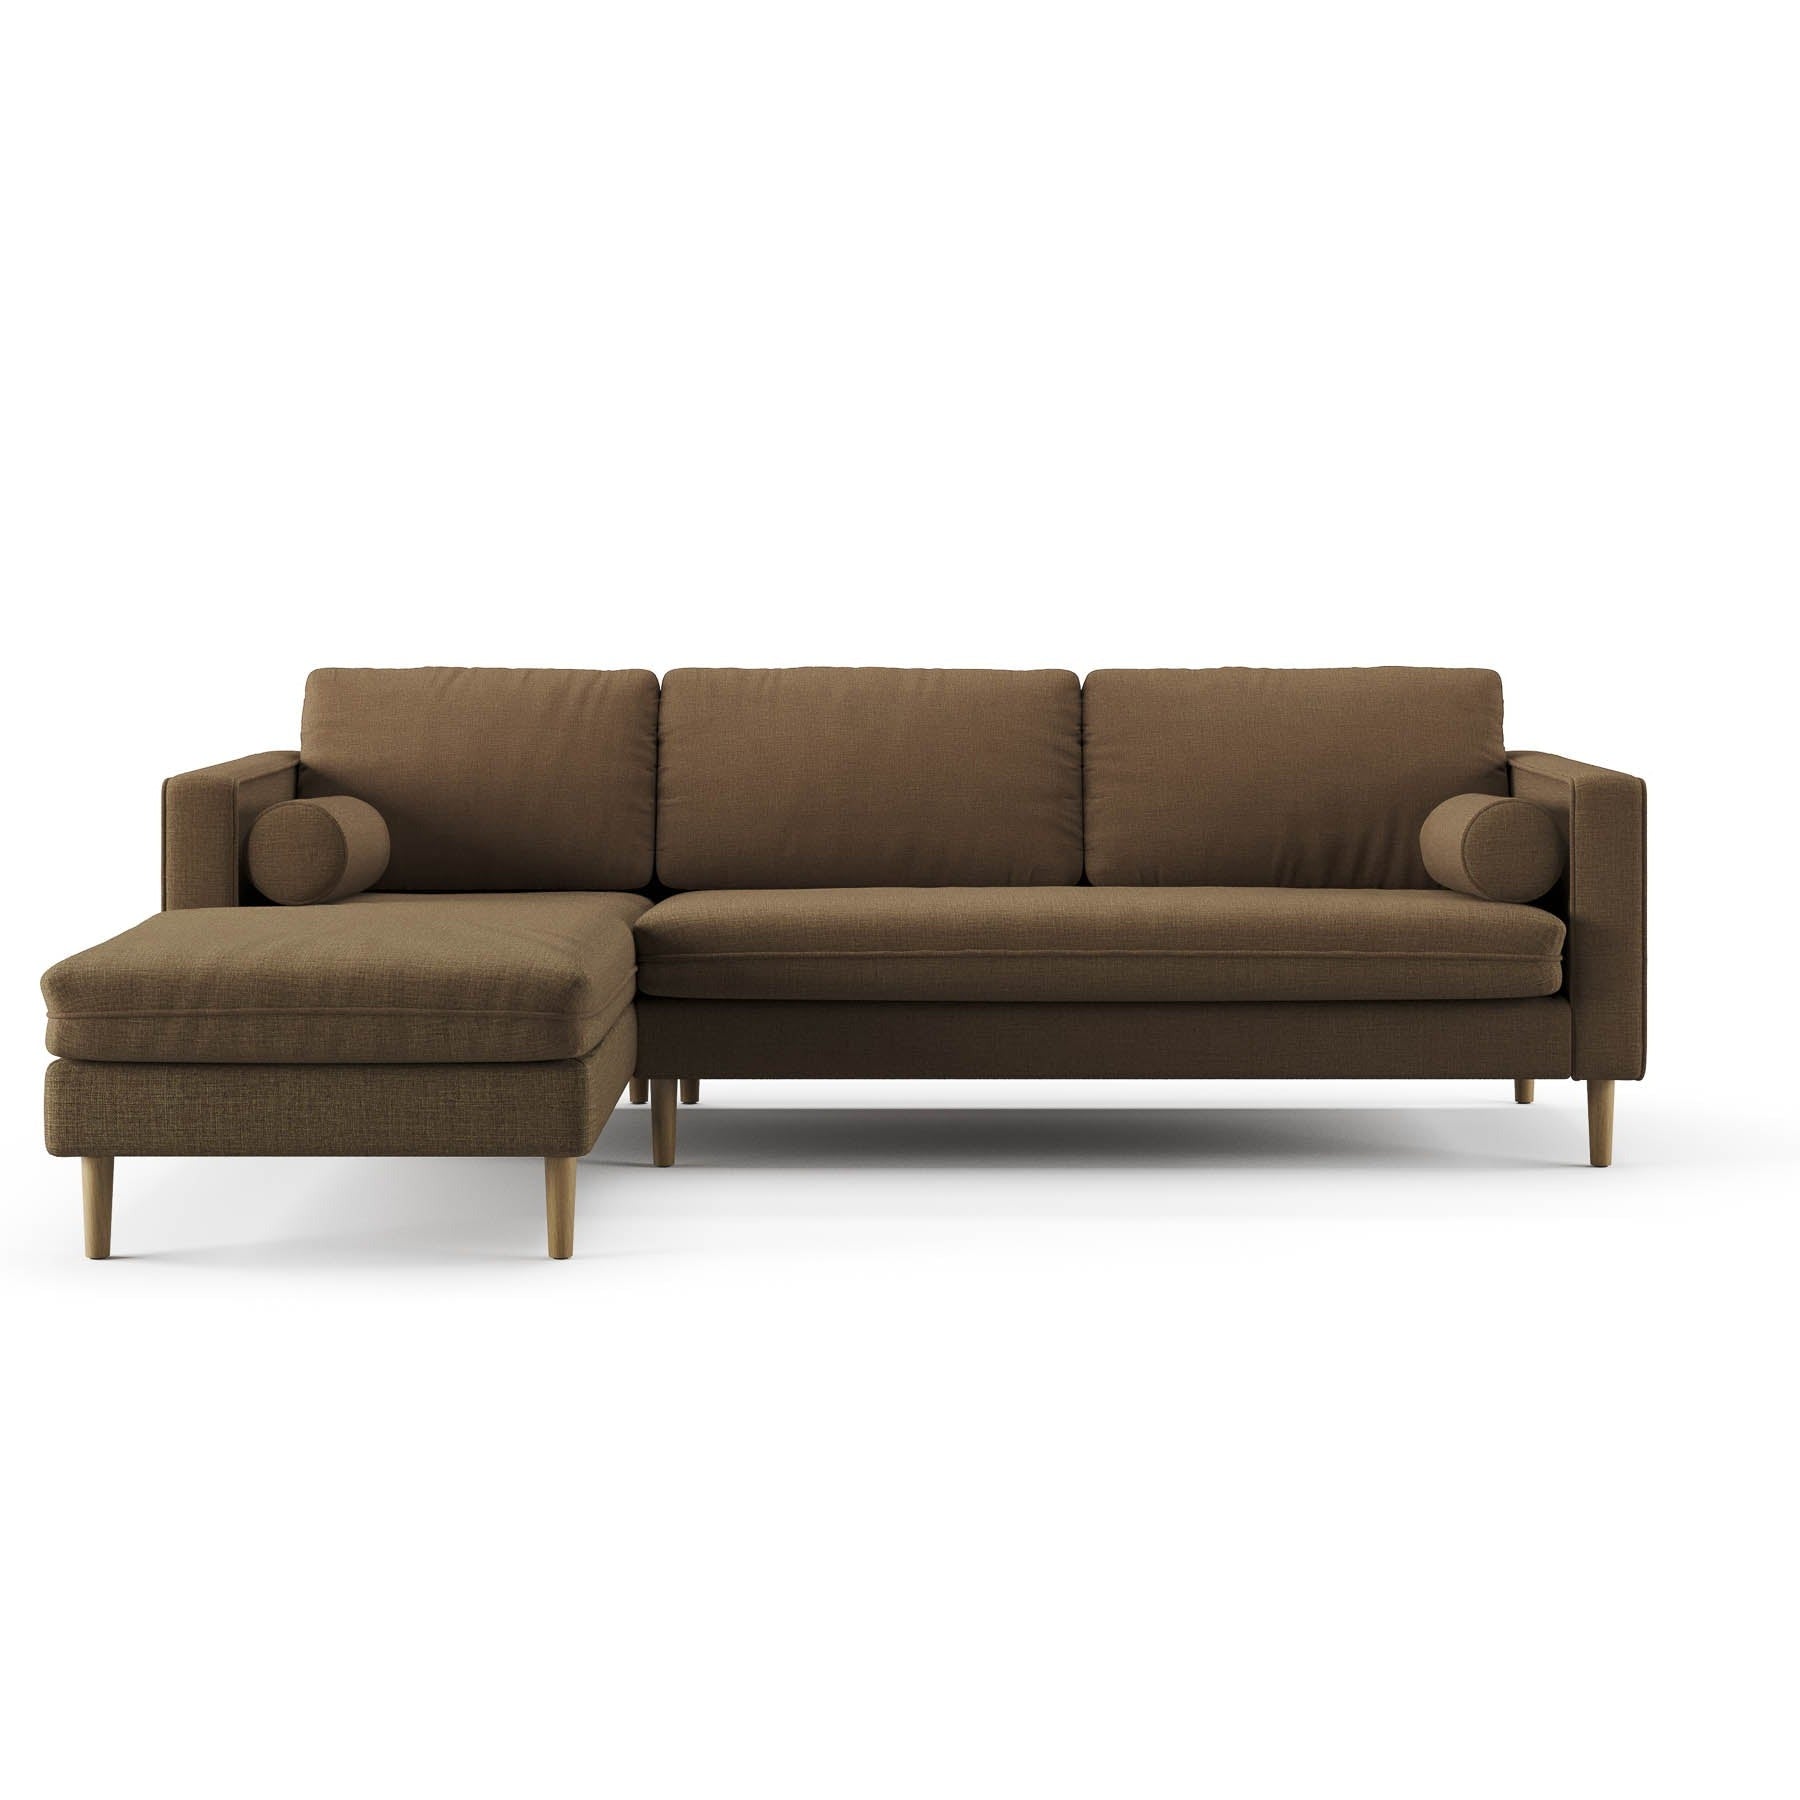 umber-brown  right-sectional